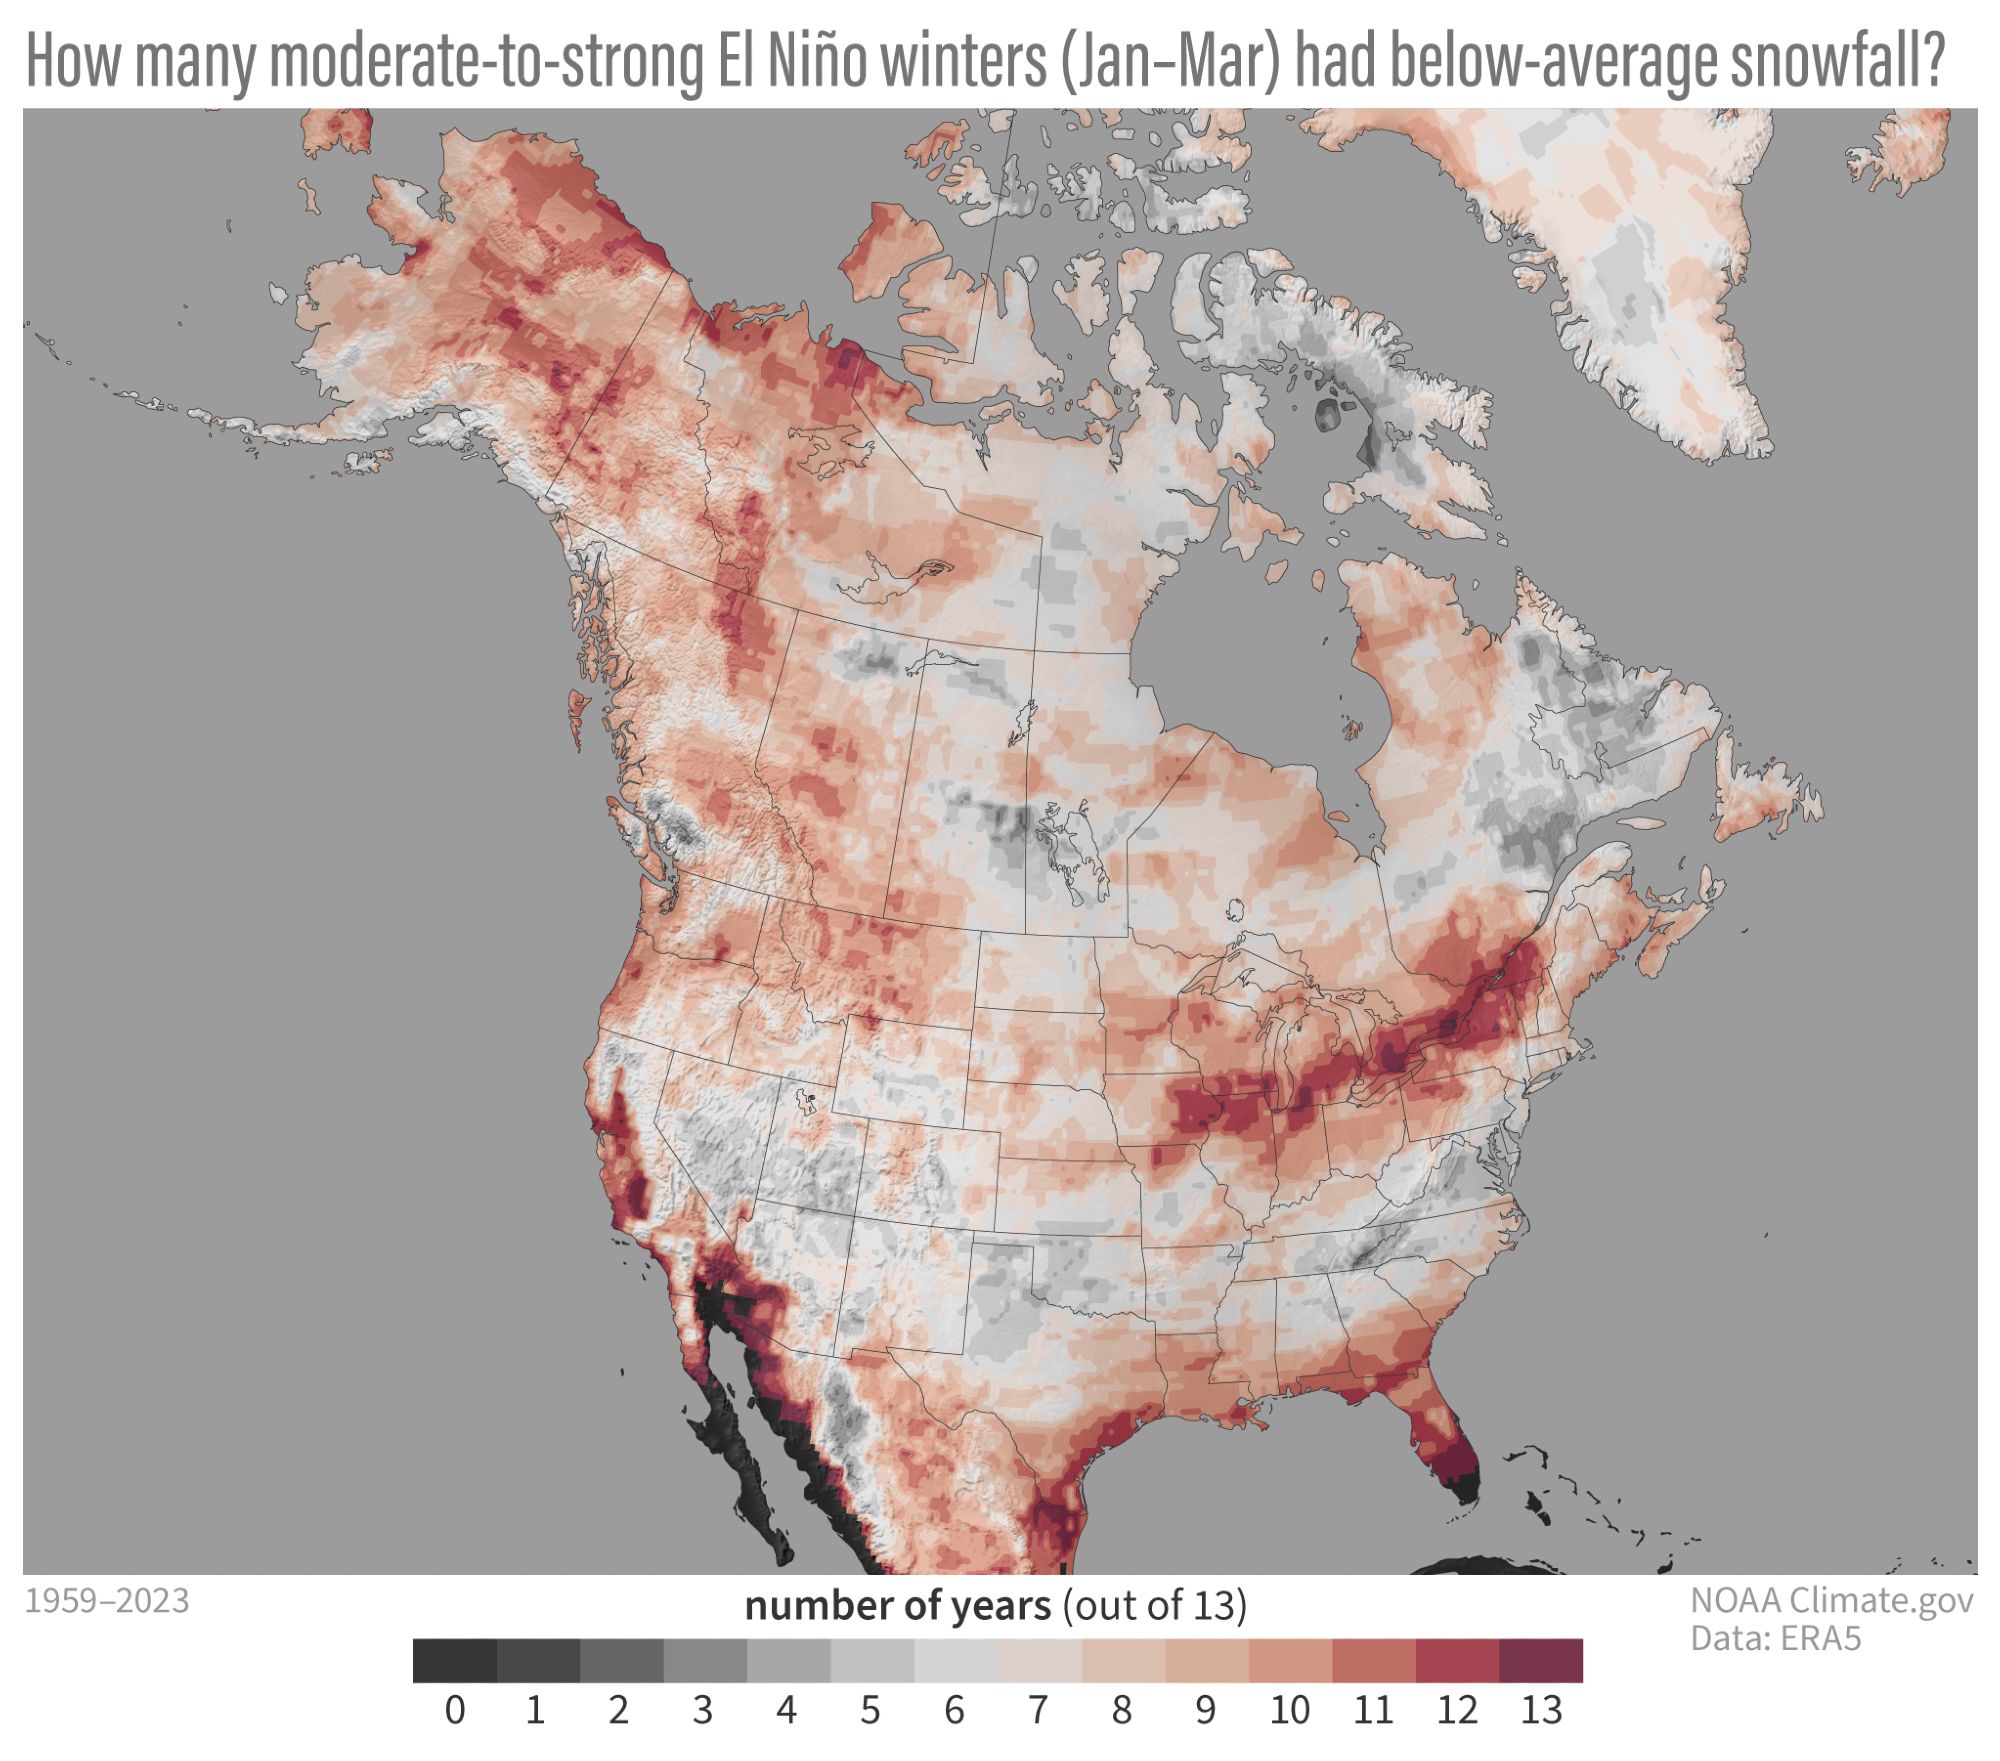 U.S. Snow Cover for This Time of Year Is Least Expansive in 17